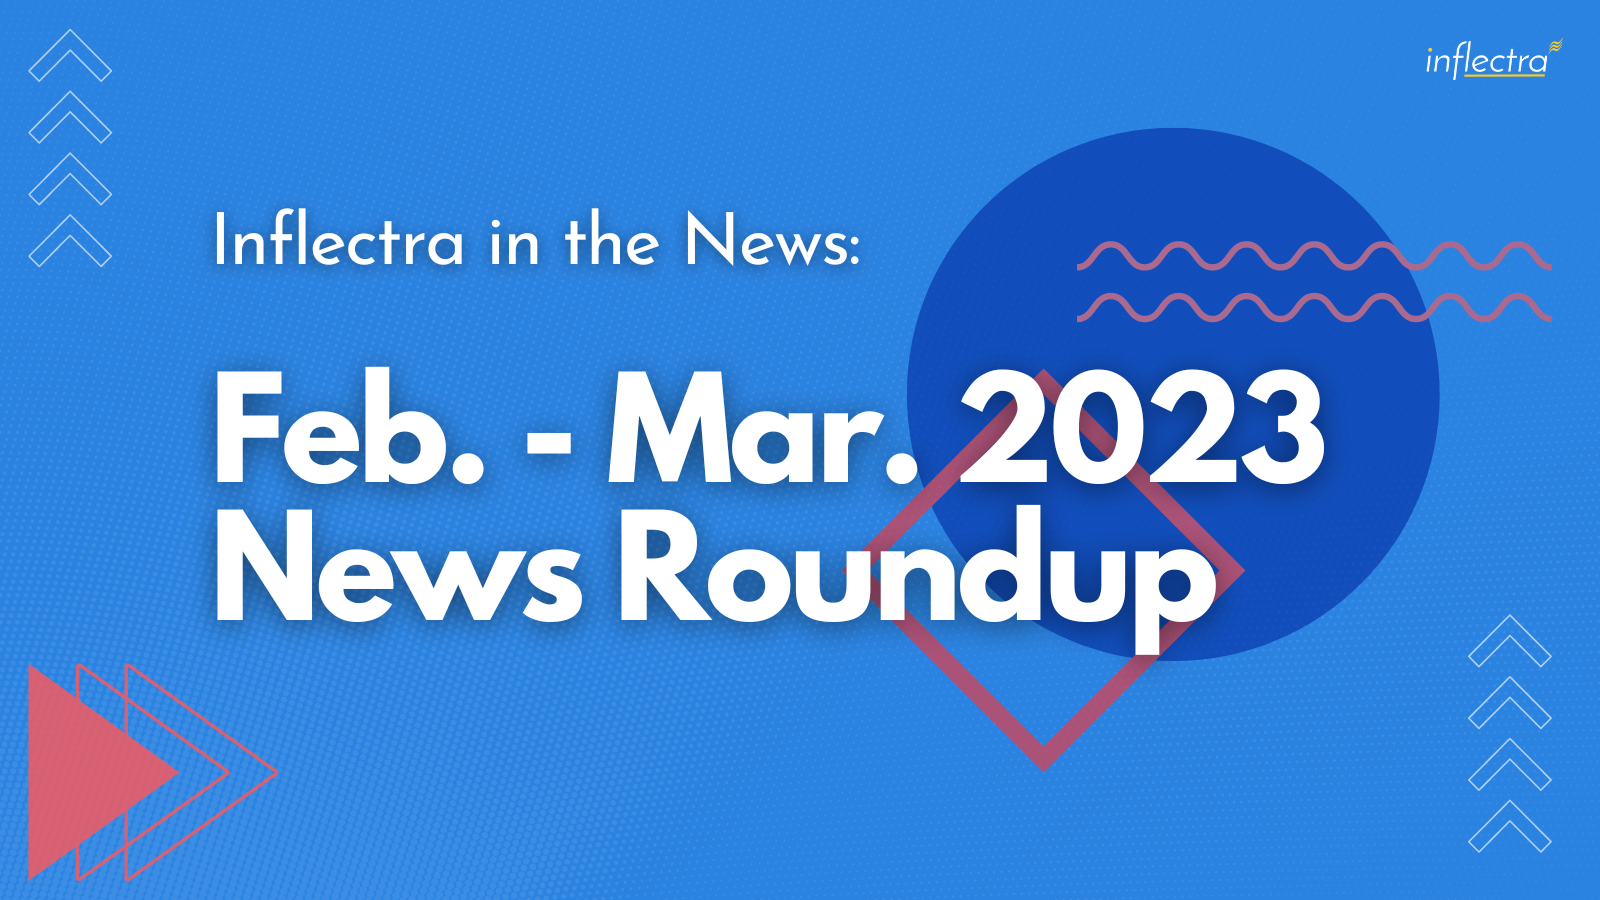 inflectra-in-the-news-february-march-roundup-image